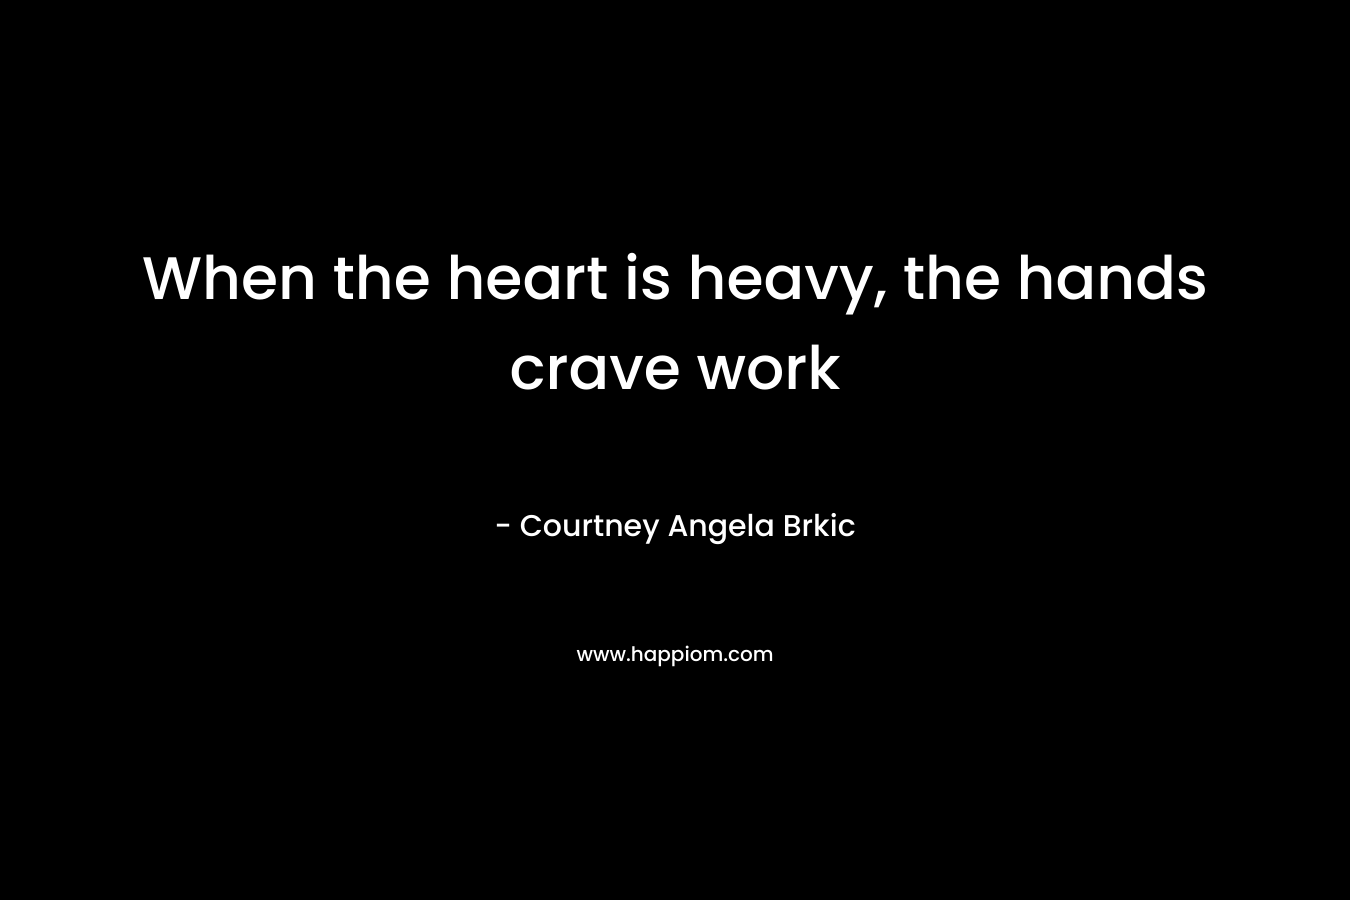 When the heart is heavy, the hands crave work